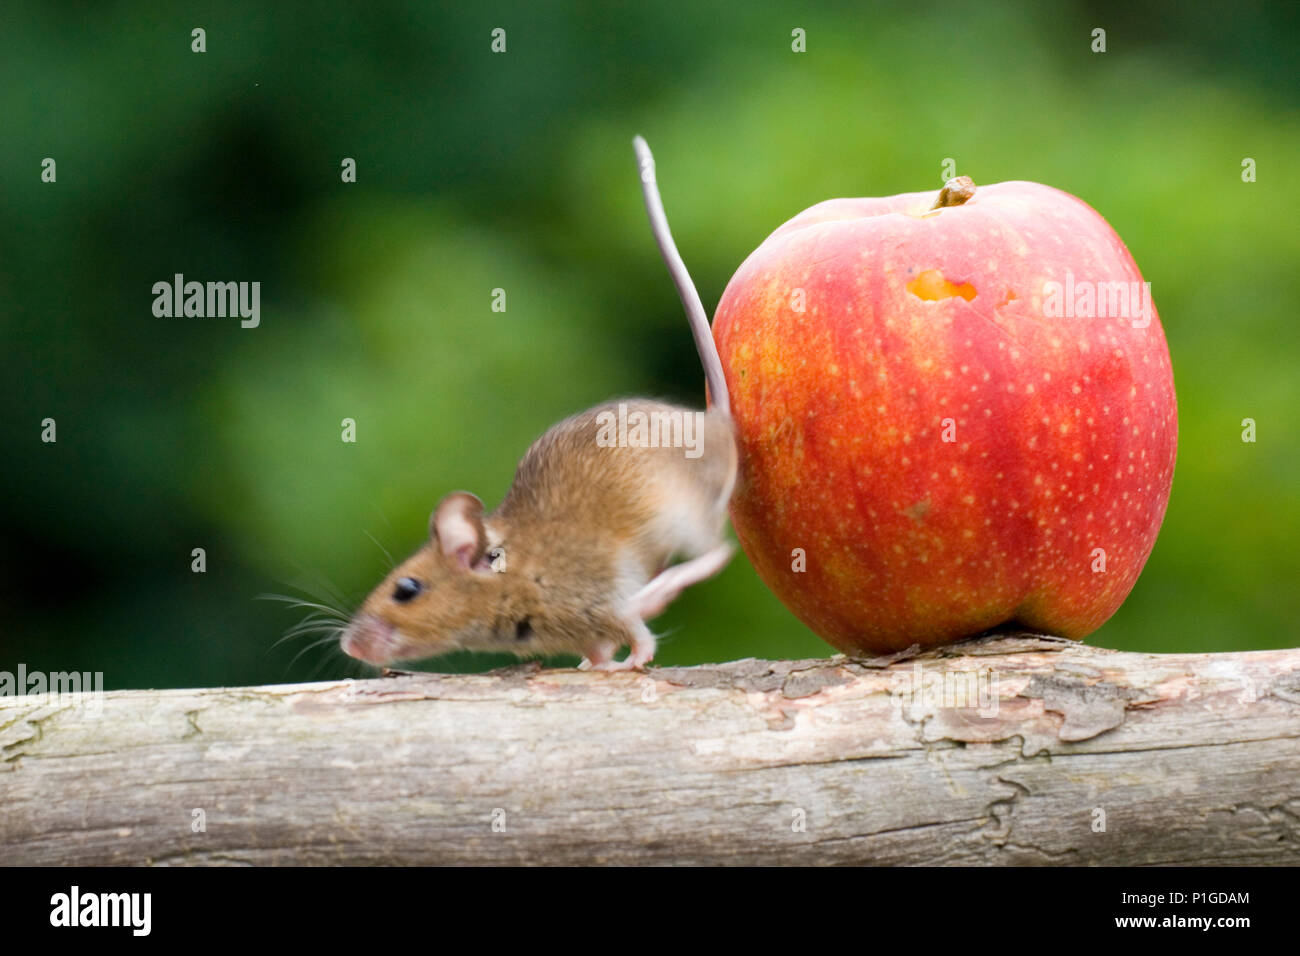 Mouse jumps from the apples, captive, Maus springt vom Apfel Stock Photo